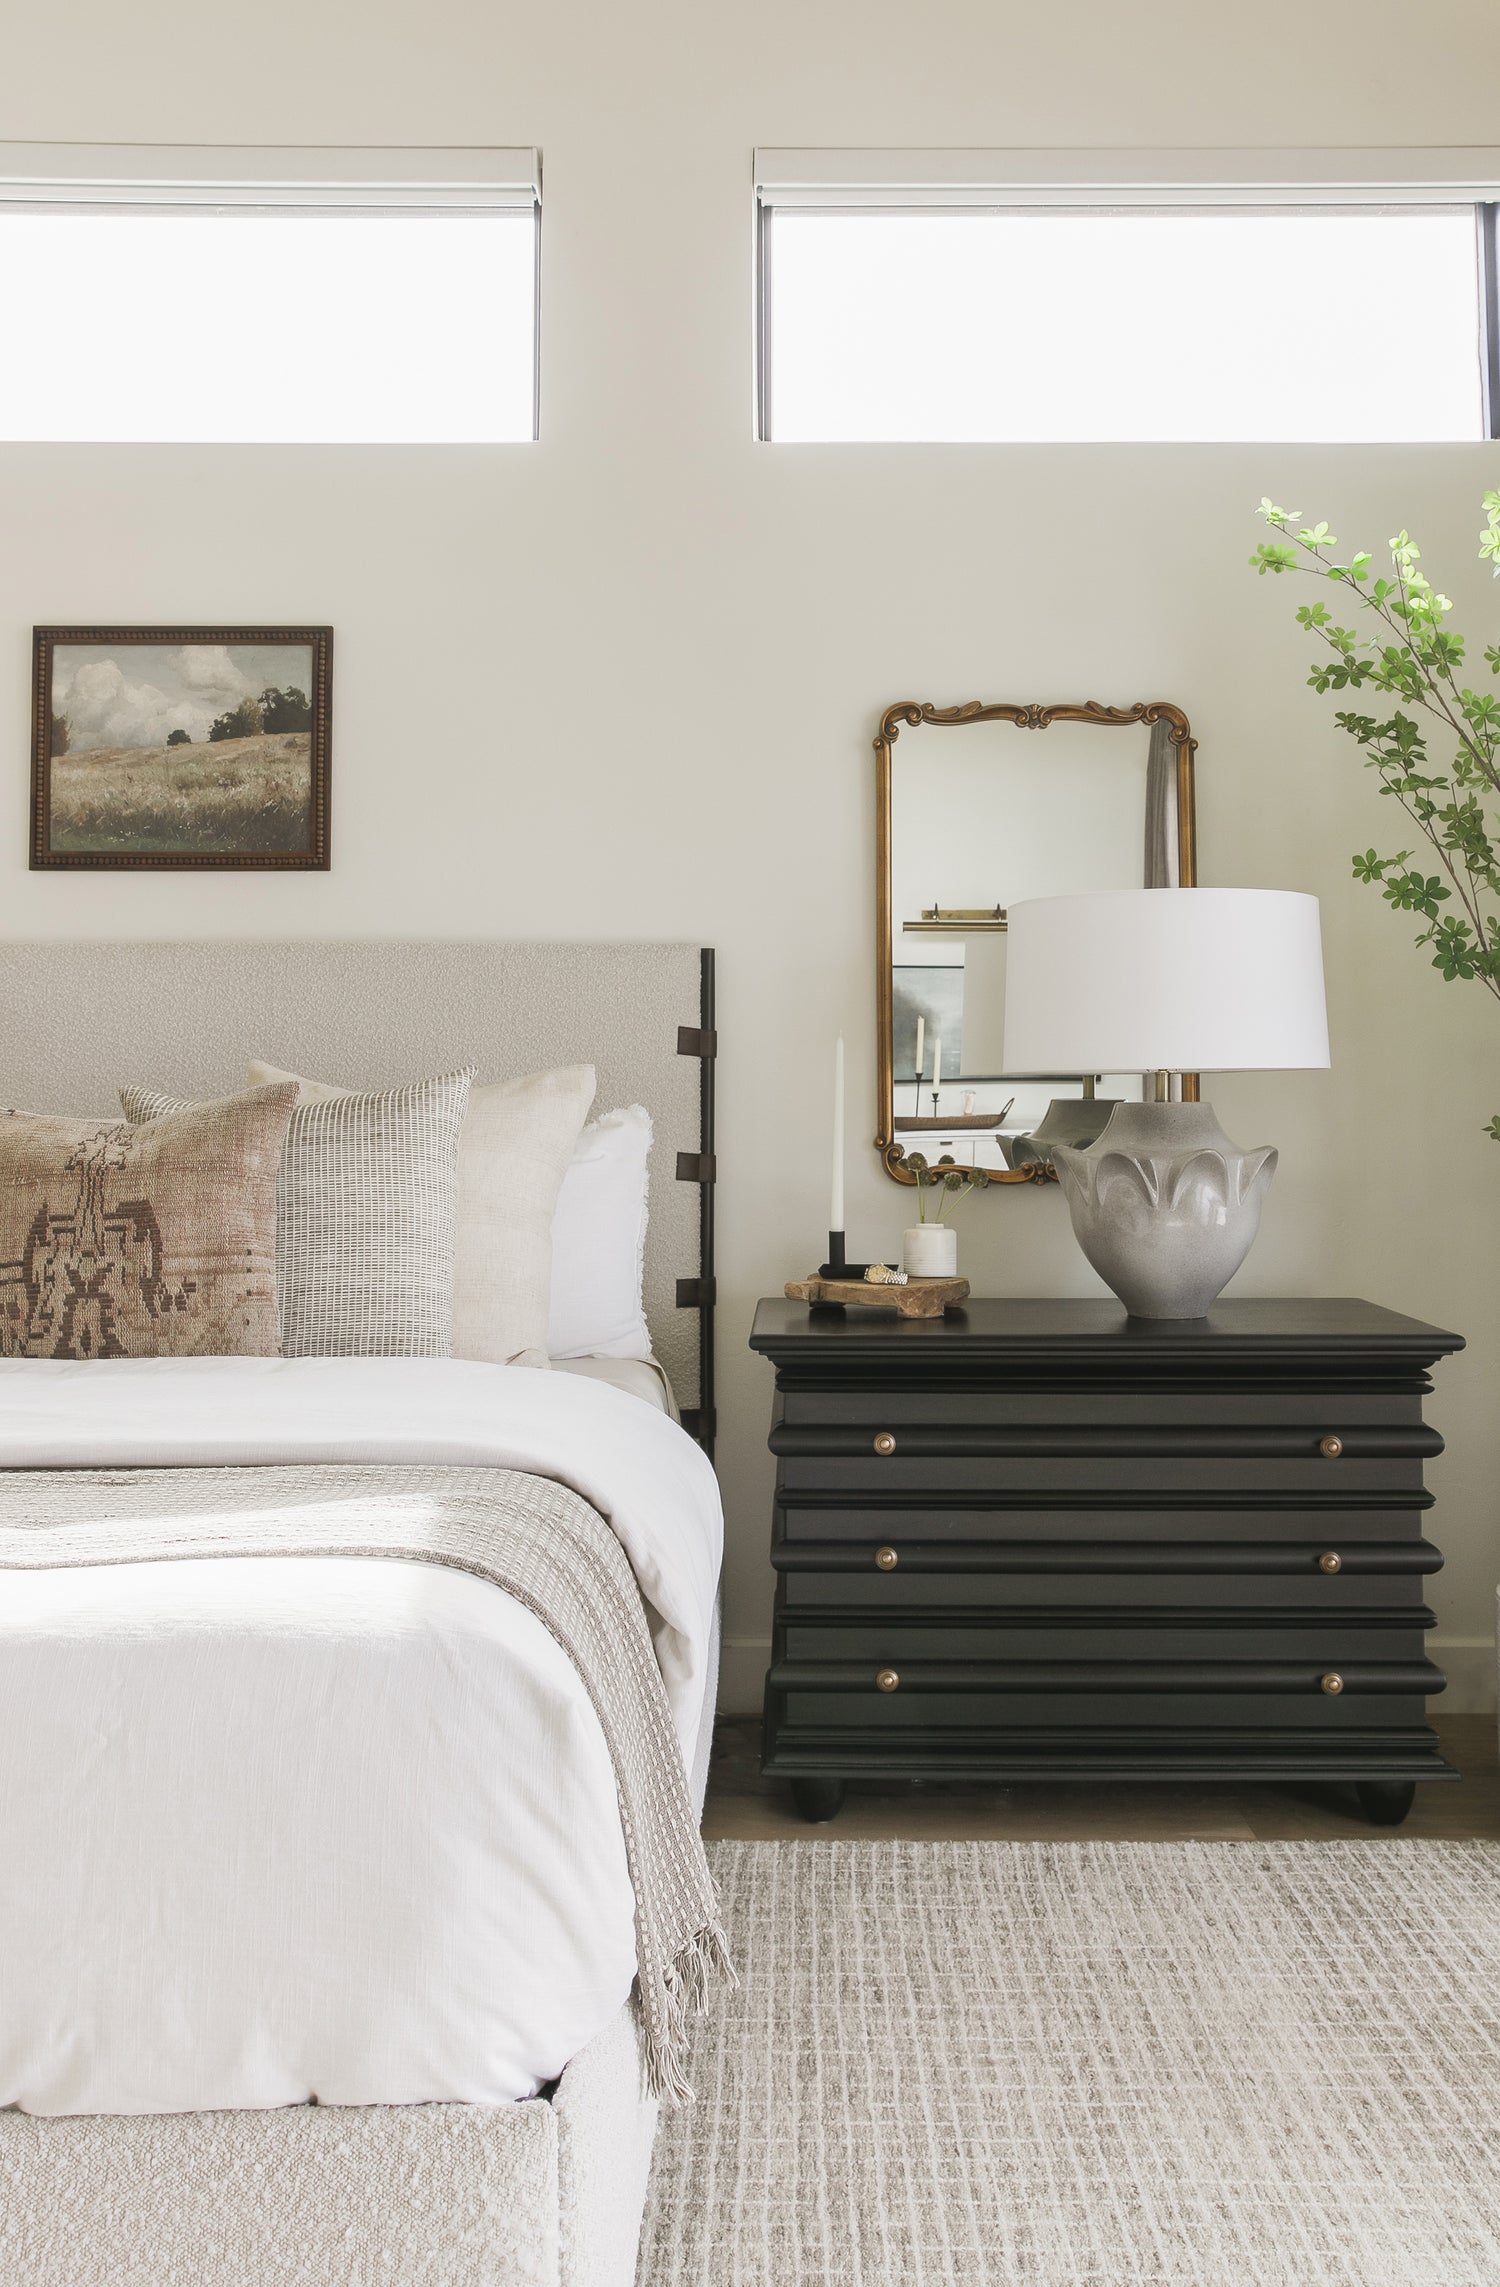 Bed and nightstand with several coordinating pillows arranged on the bed - View our designer guide to pillow collections